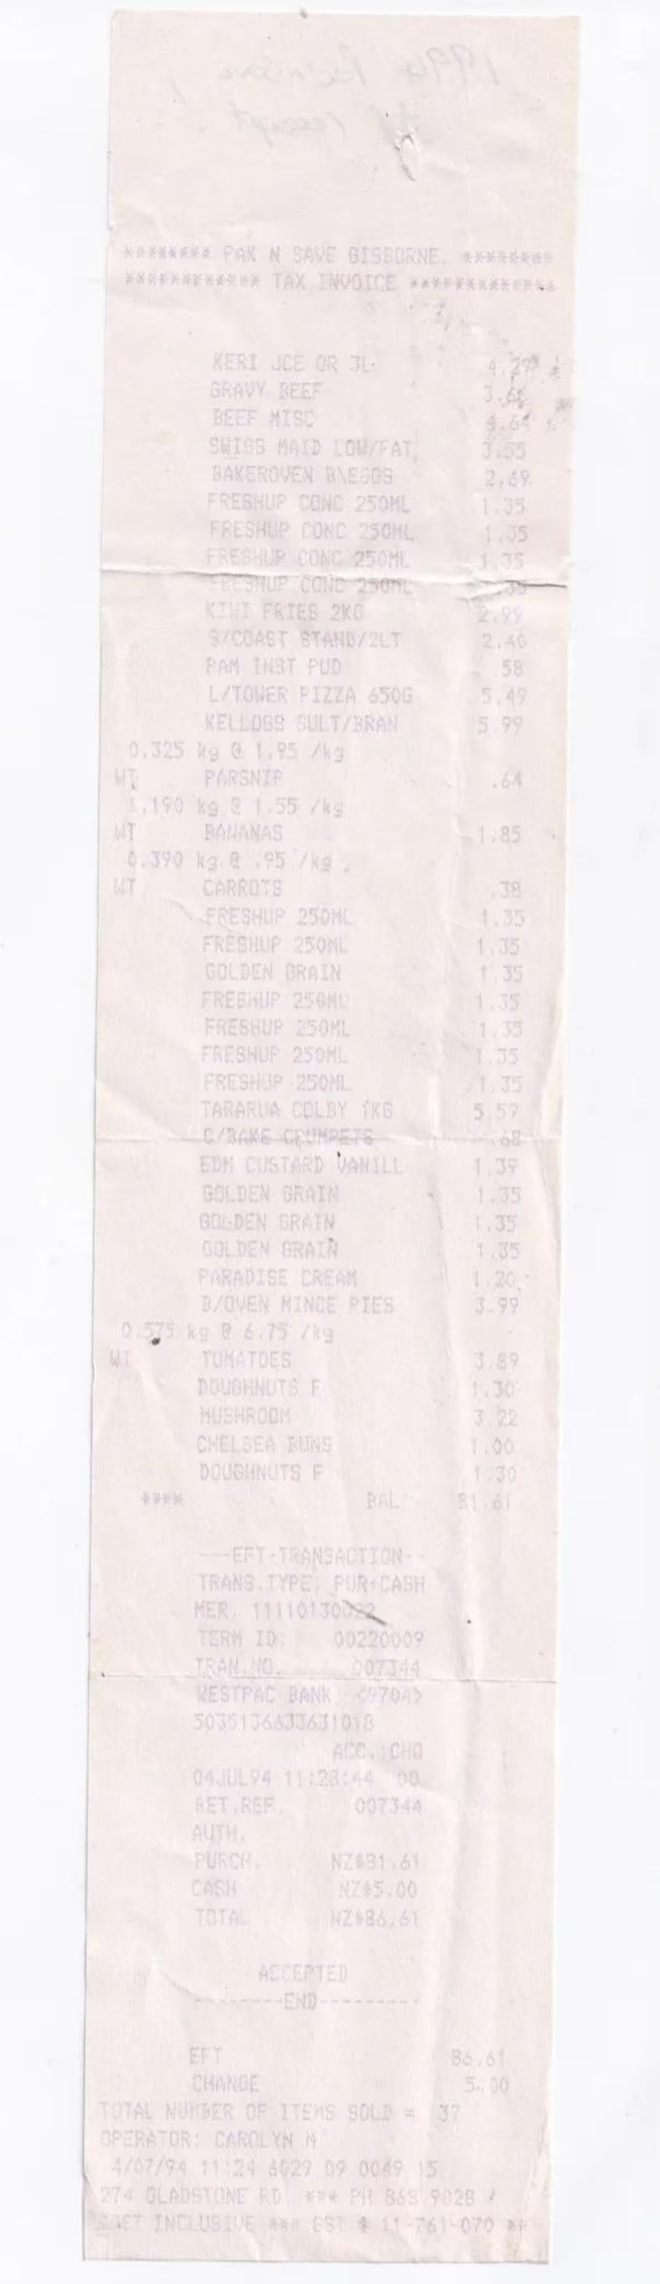 FireShot Capture 097 - How much did groceries cost in 1994_ 30-year-old receipt shows how mu_ - www.nzherald.co.nz.png